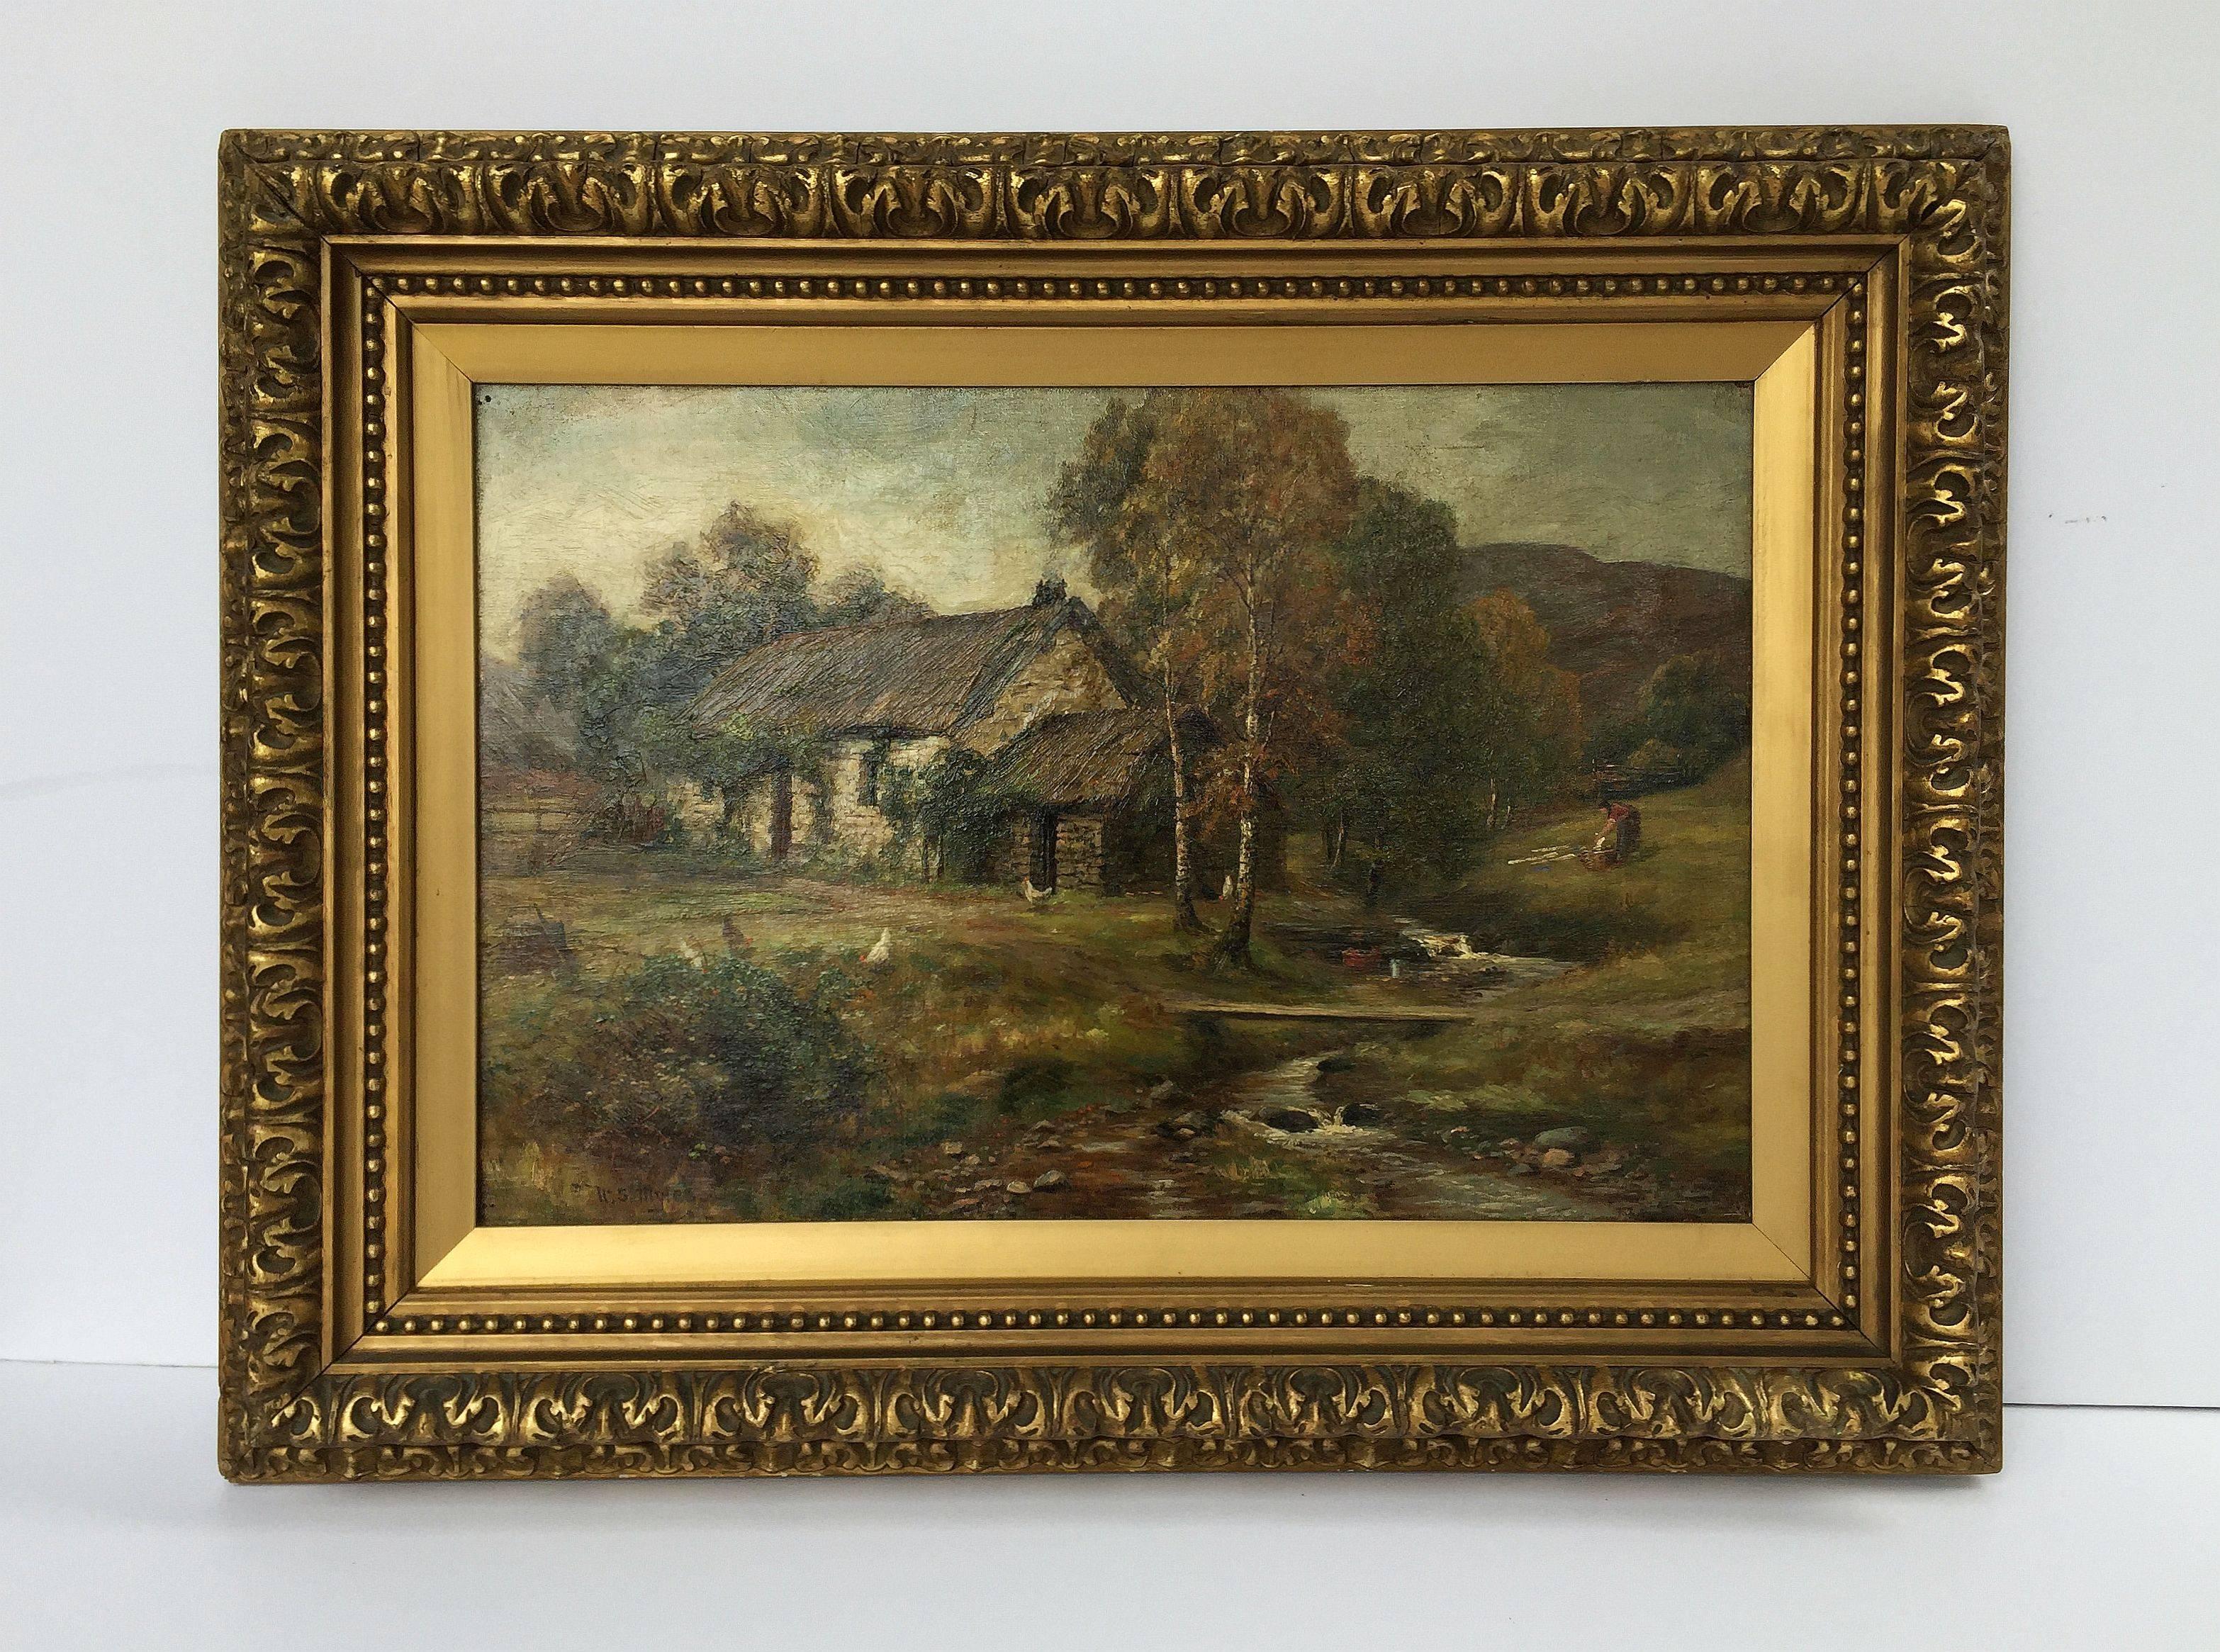 A handsome landscape oil painting on canvas in gilt frame by the British painter, W.S. Myles (William Scott Myles, circa 1850-1911), featuring a scene of a thatched roof stone cottage by a stream.

Signed (bottom left corner): WS Myles

Canvas